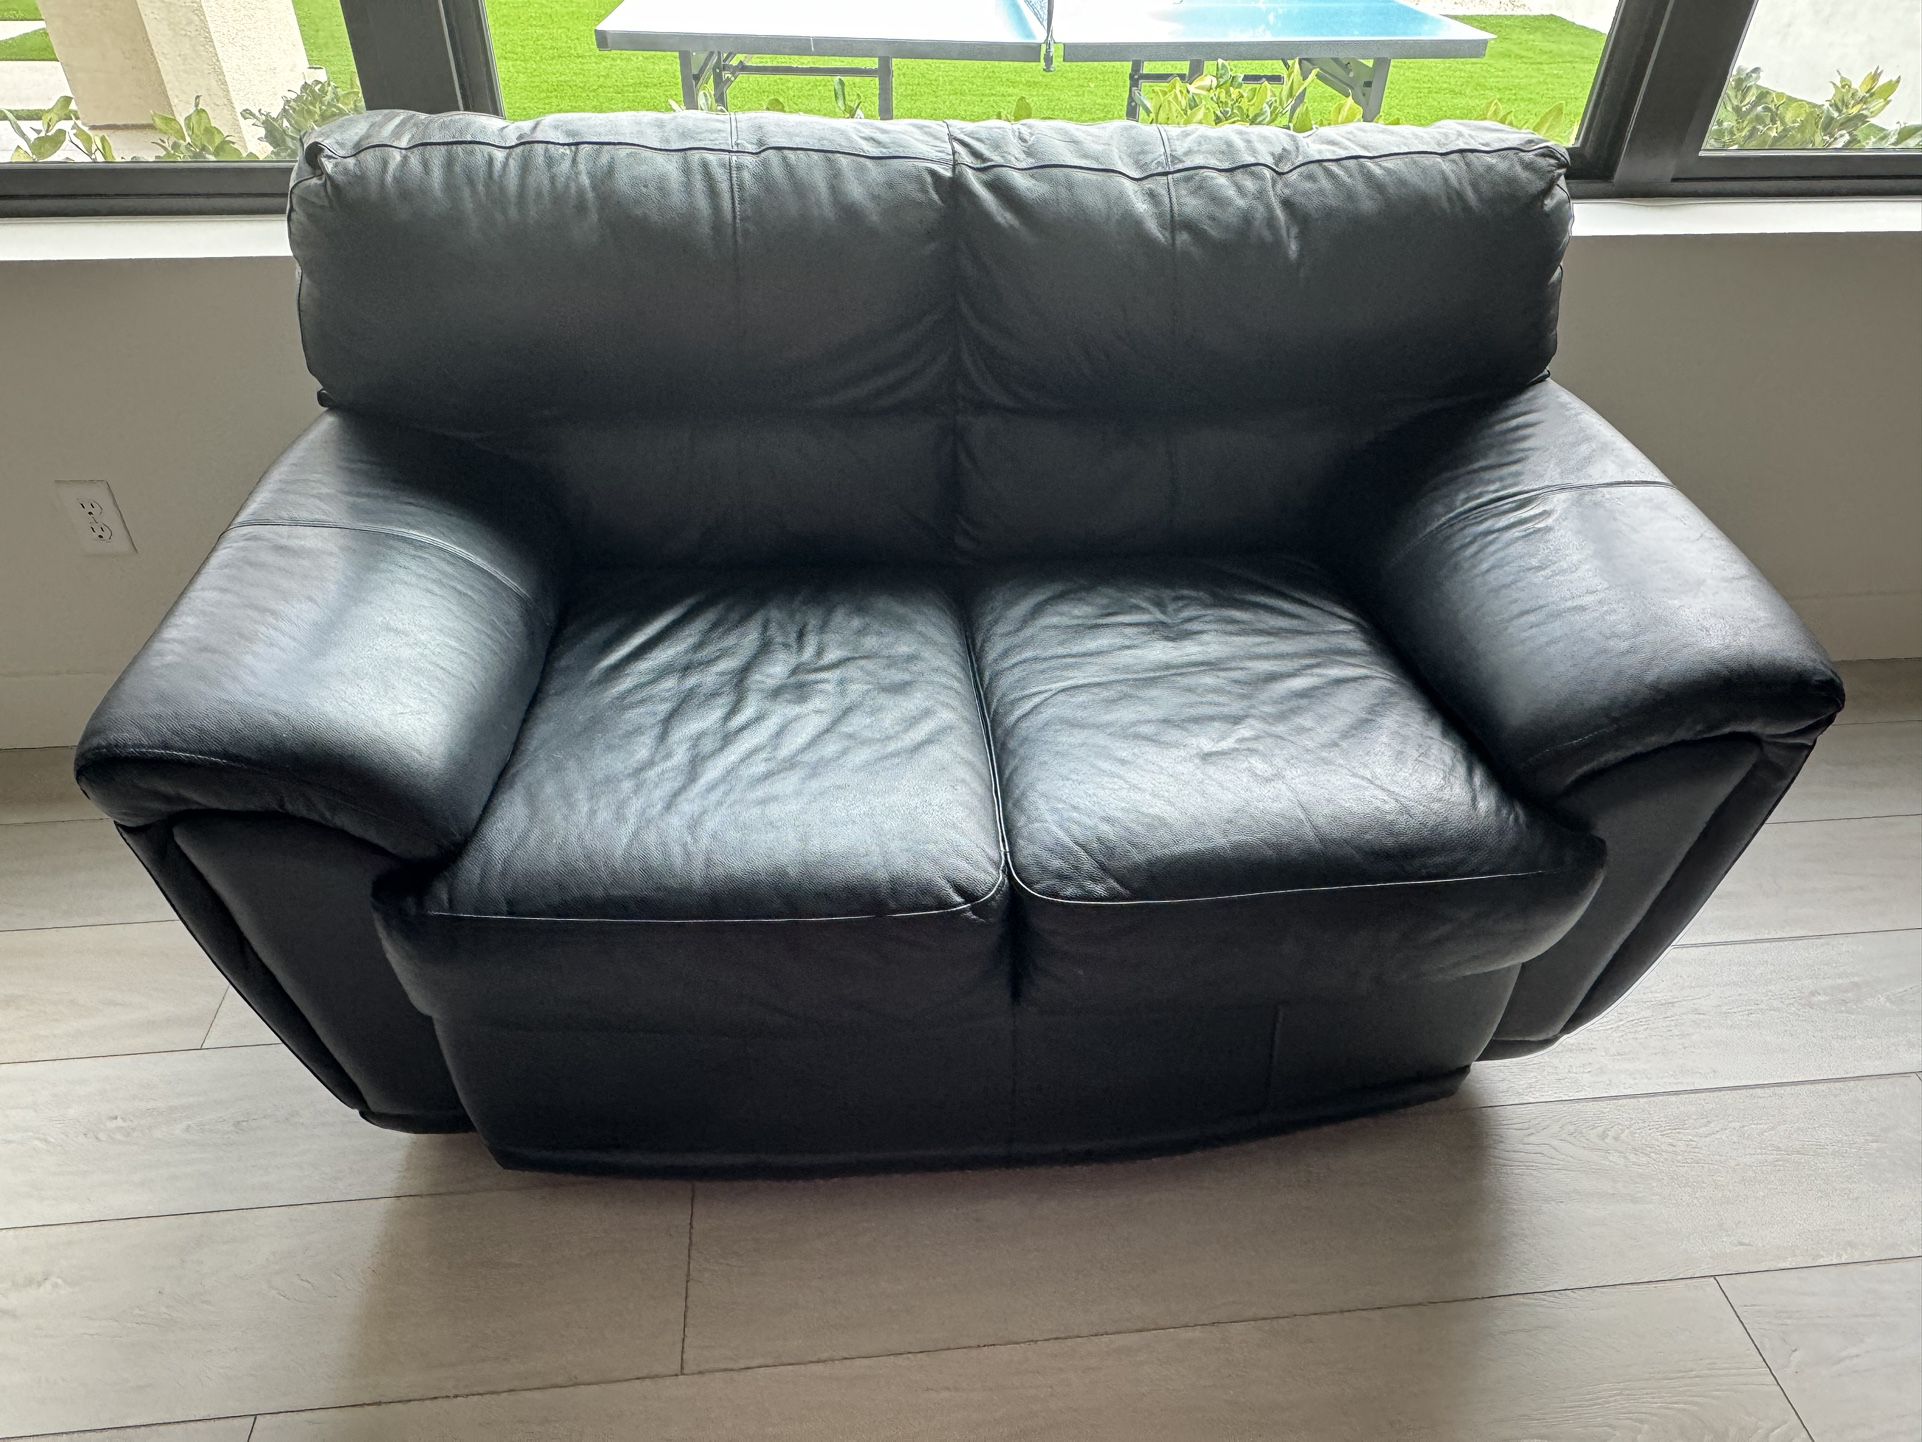 Black Leather Love Seat - Large - Most Comfy Ever !! 